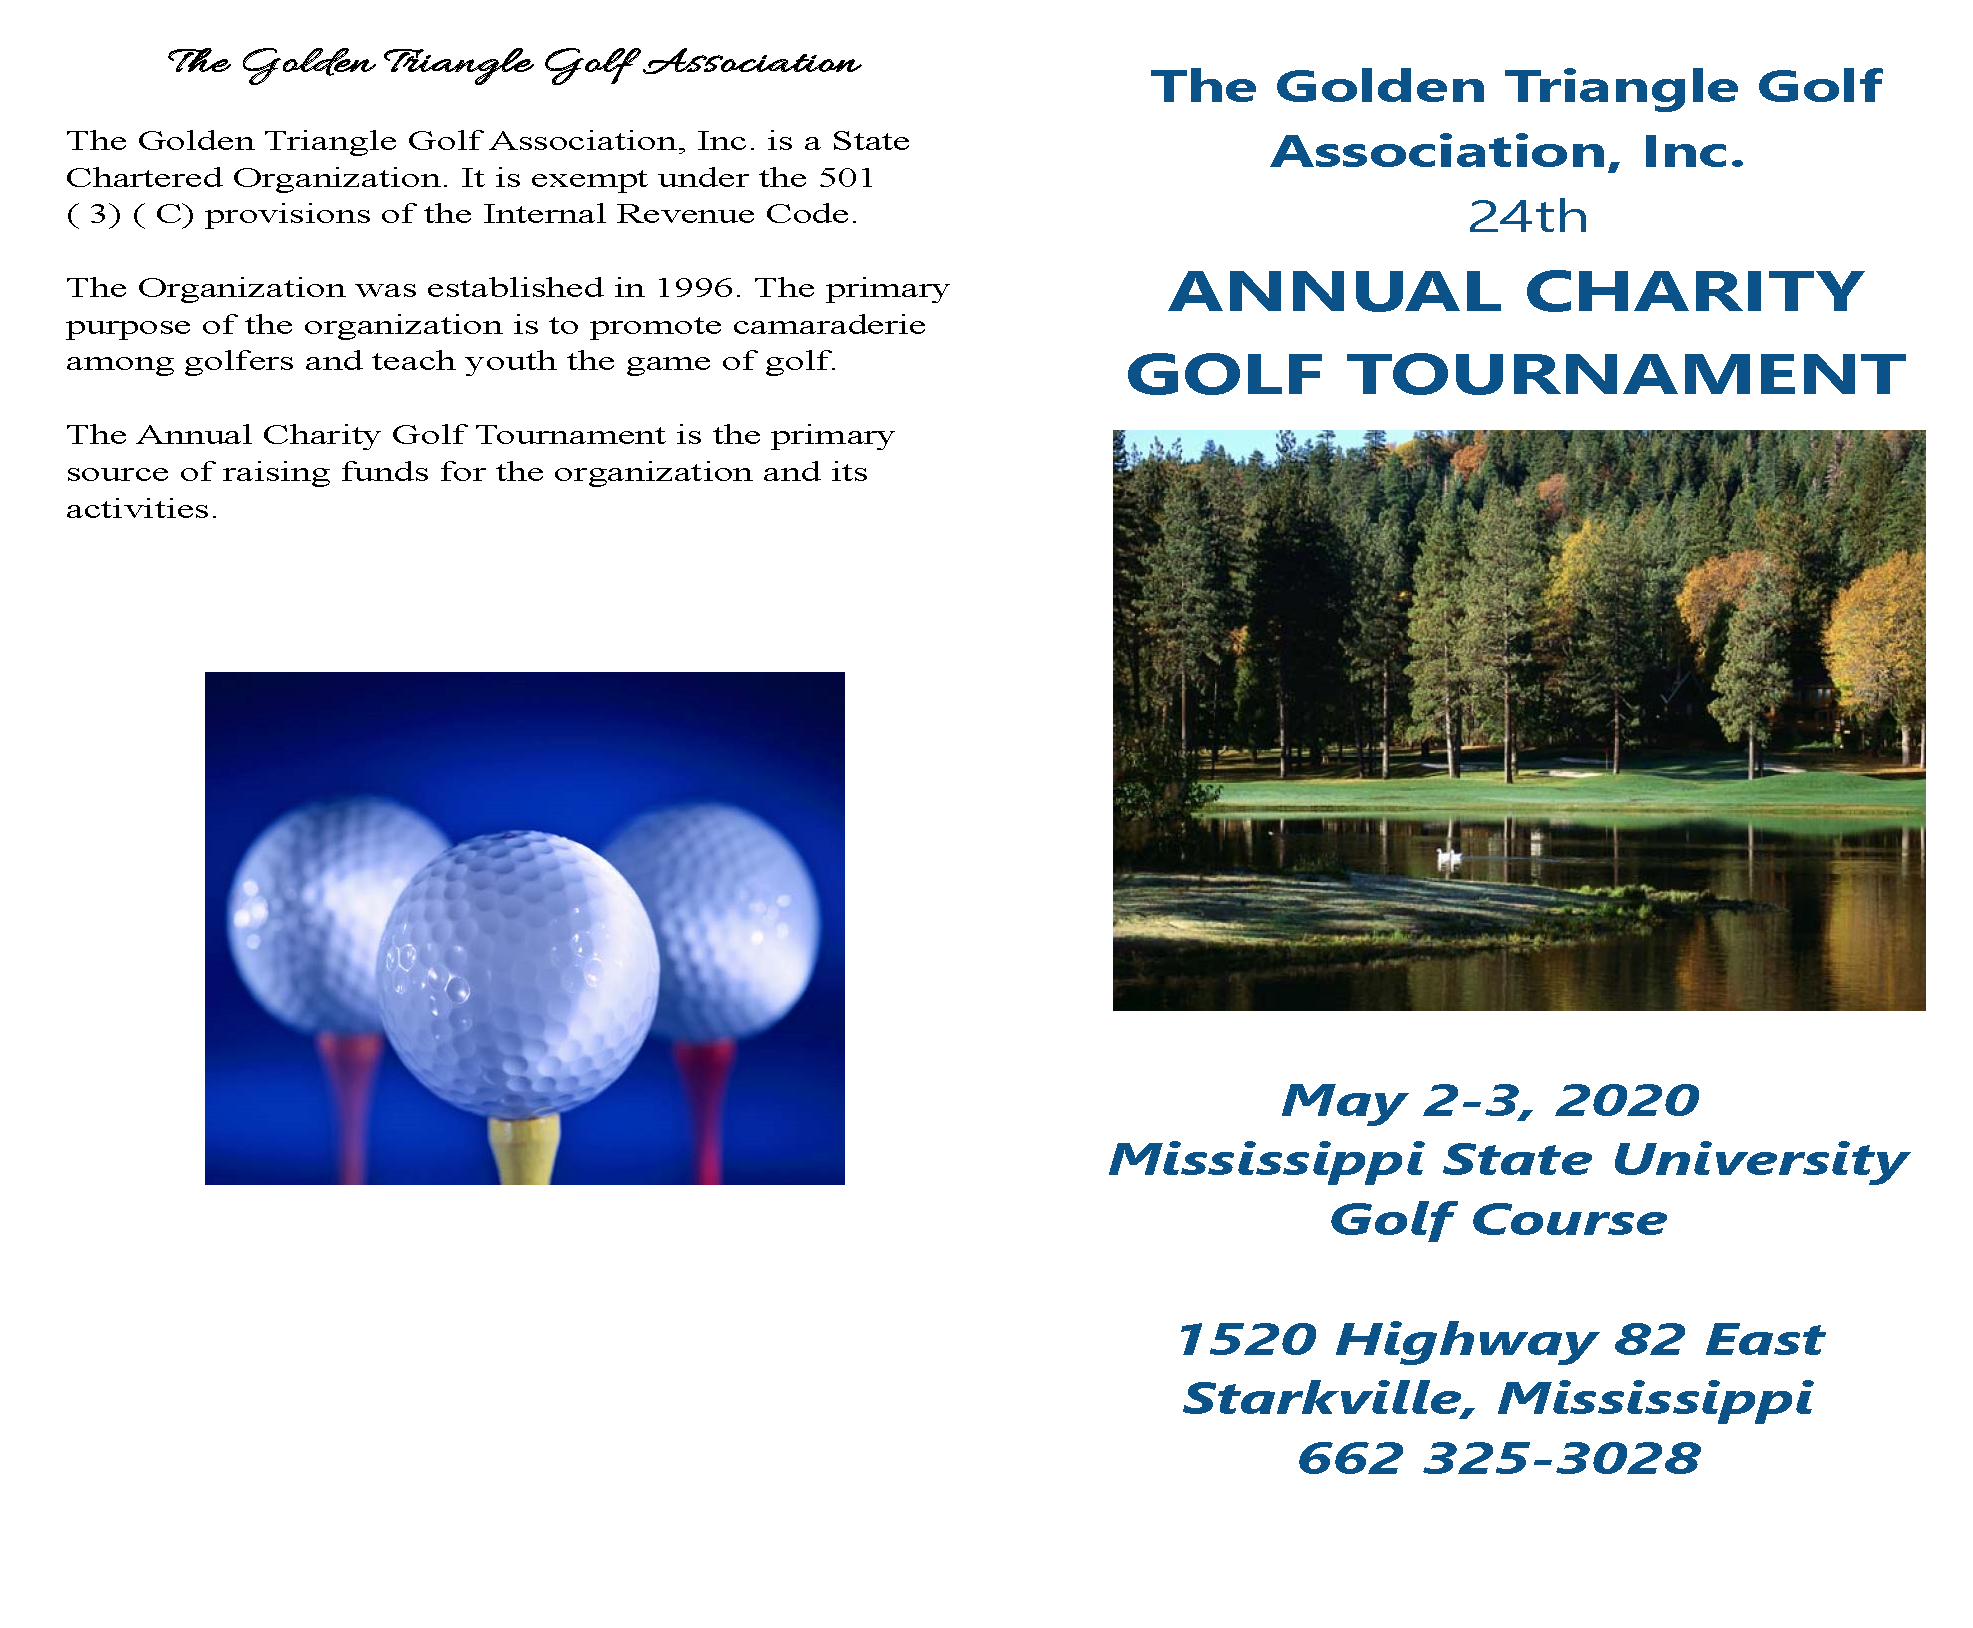 Welcome to The Golden Triangle Golf Association